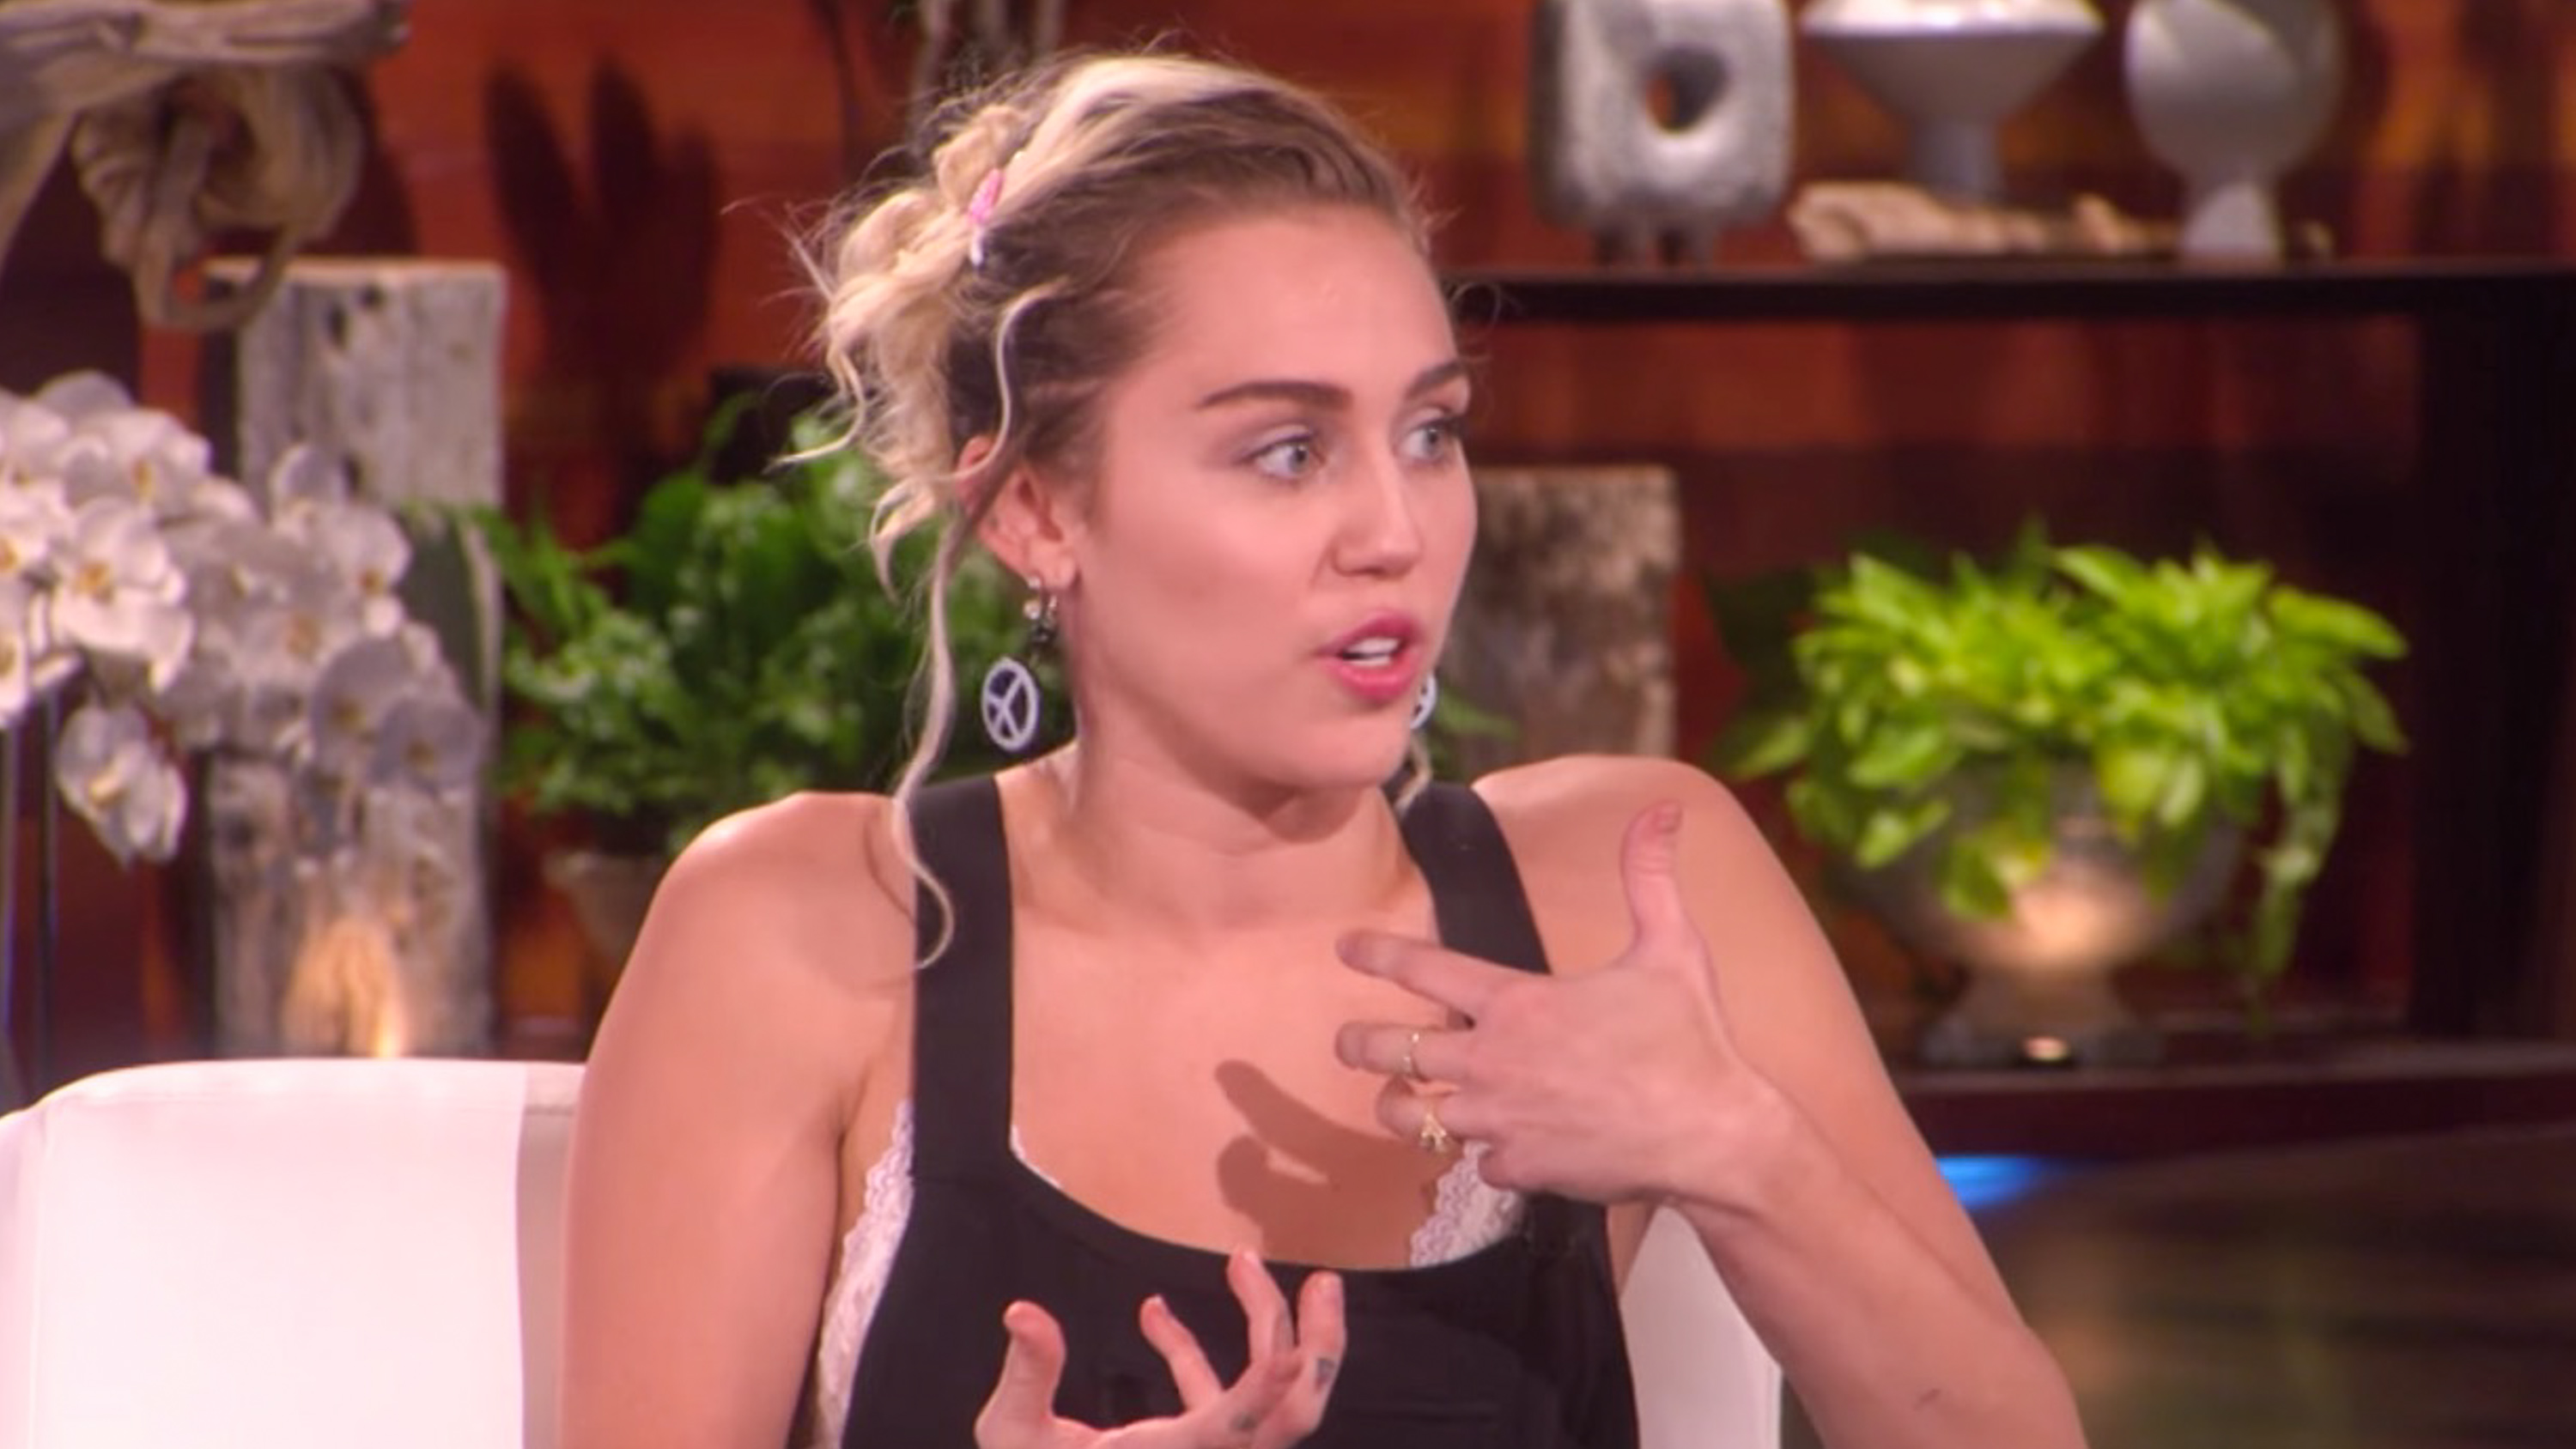 MILEY CYRUS. The singer talks about her engagement ring from Liam Hemsworth on 'The Ellen DeGeneres Show.' Screengrab from YouTube/TheEllenShow  